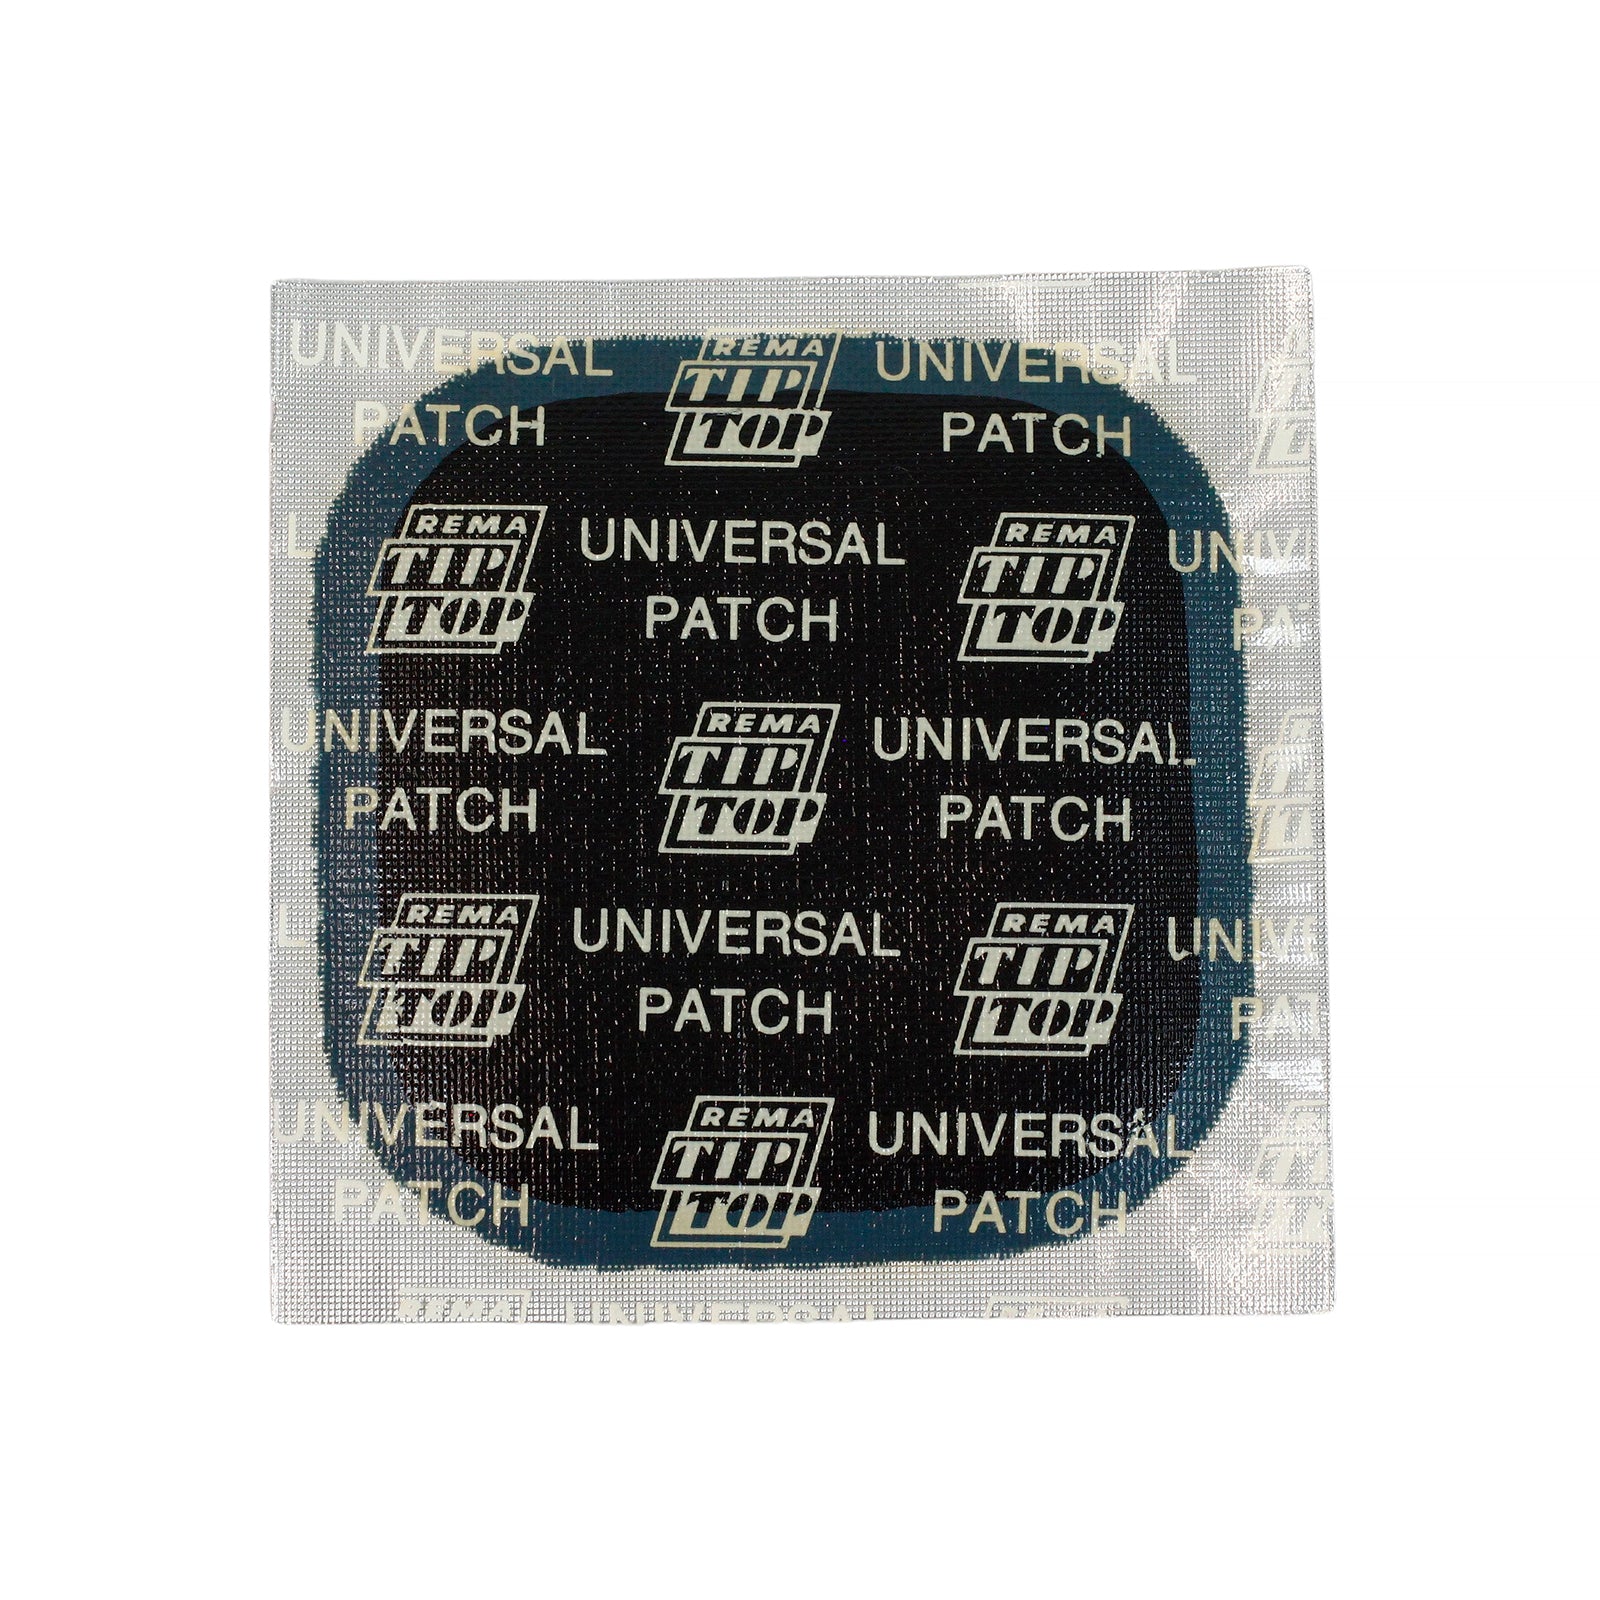 Rema UP-6 Universal Patch, 1-3/4" Square - 43mm (50 bx)